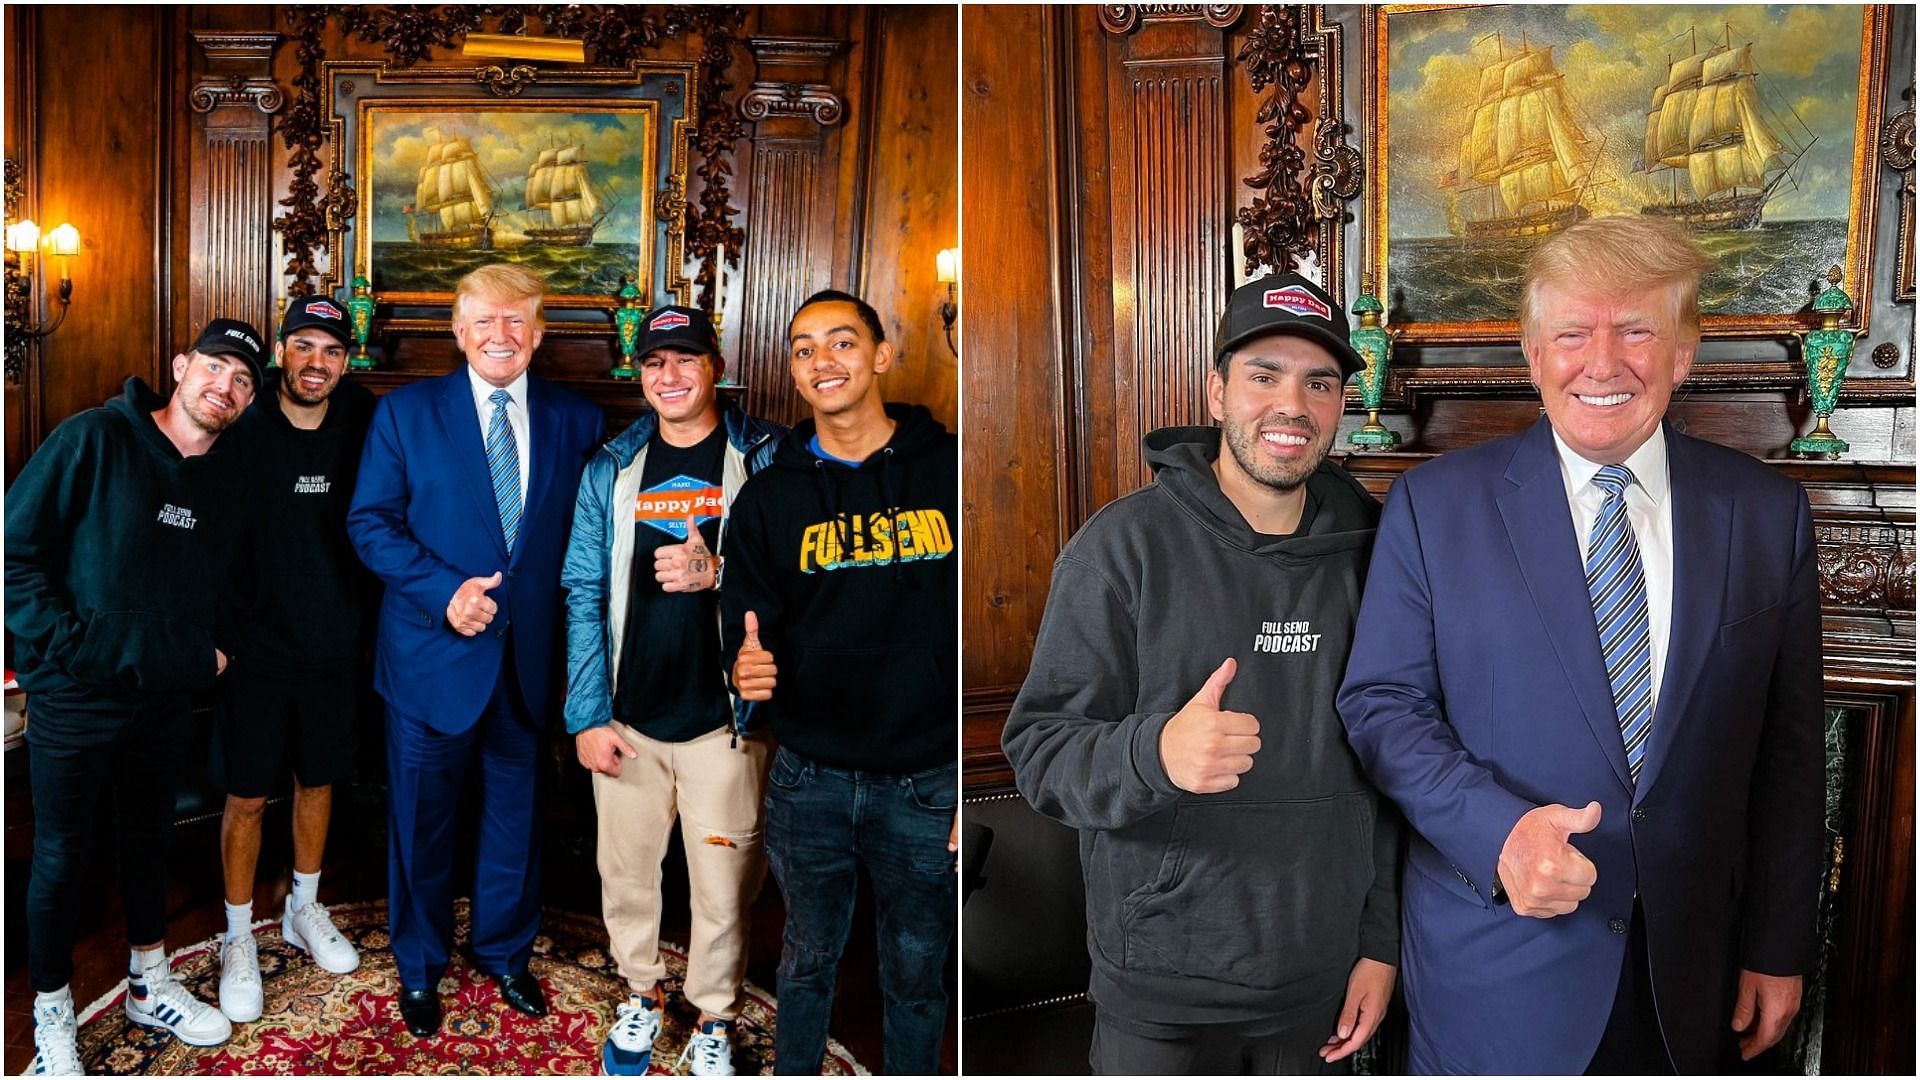 Full Send podcast interview with Donald Trump removed from YouTube received 5 million views in one day (Image via @nelk/Twitter and @kyle/Instagram)